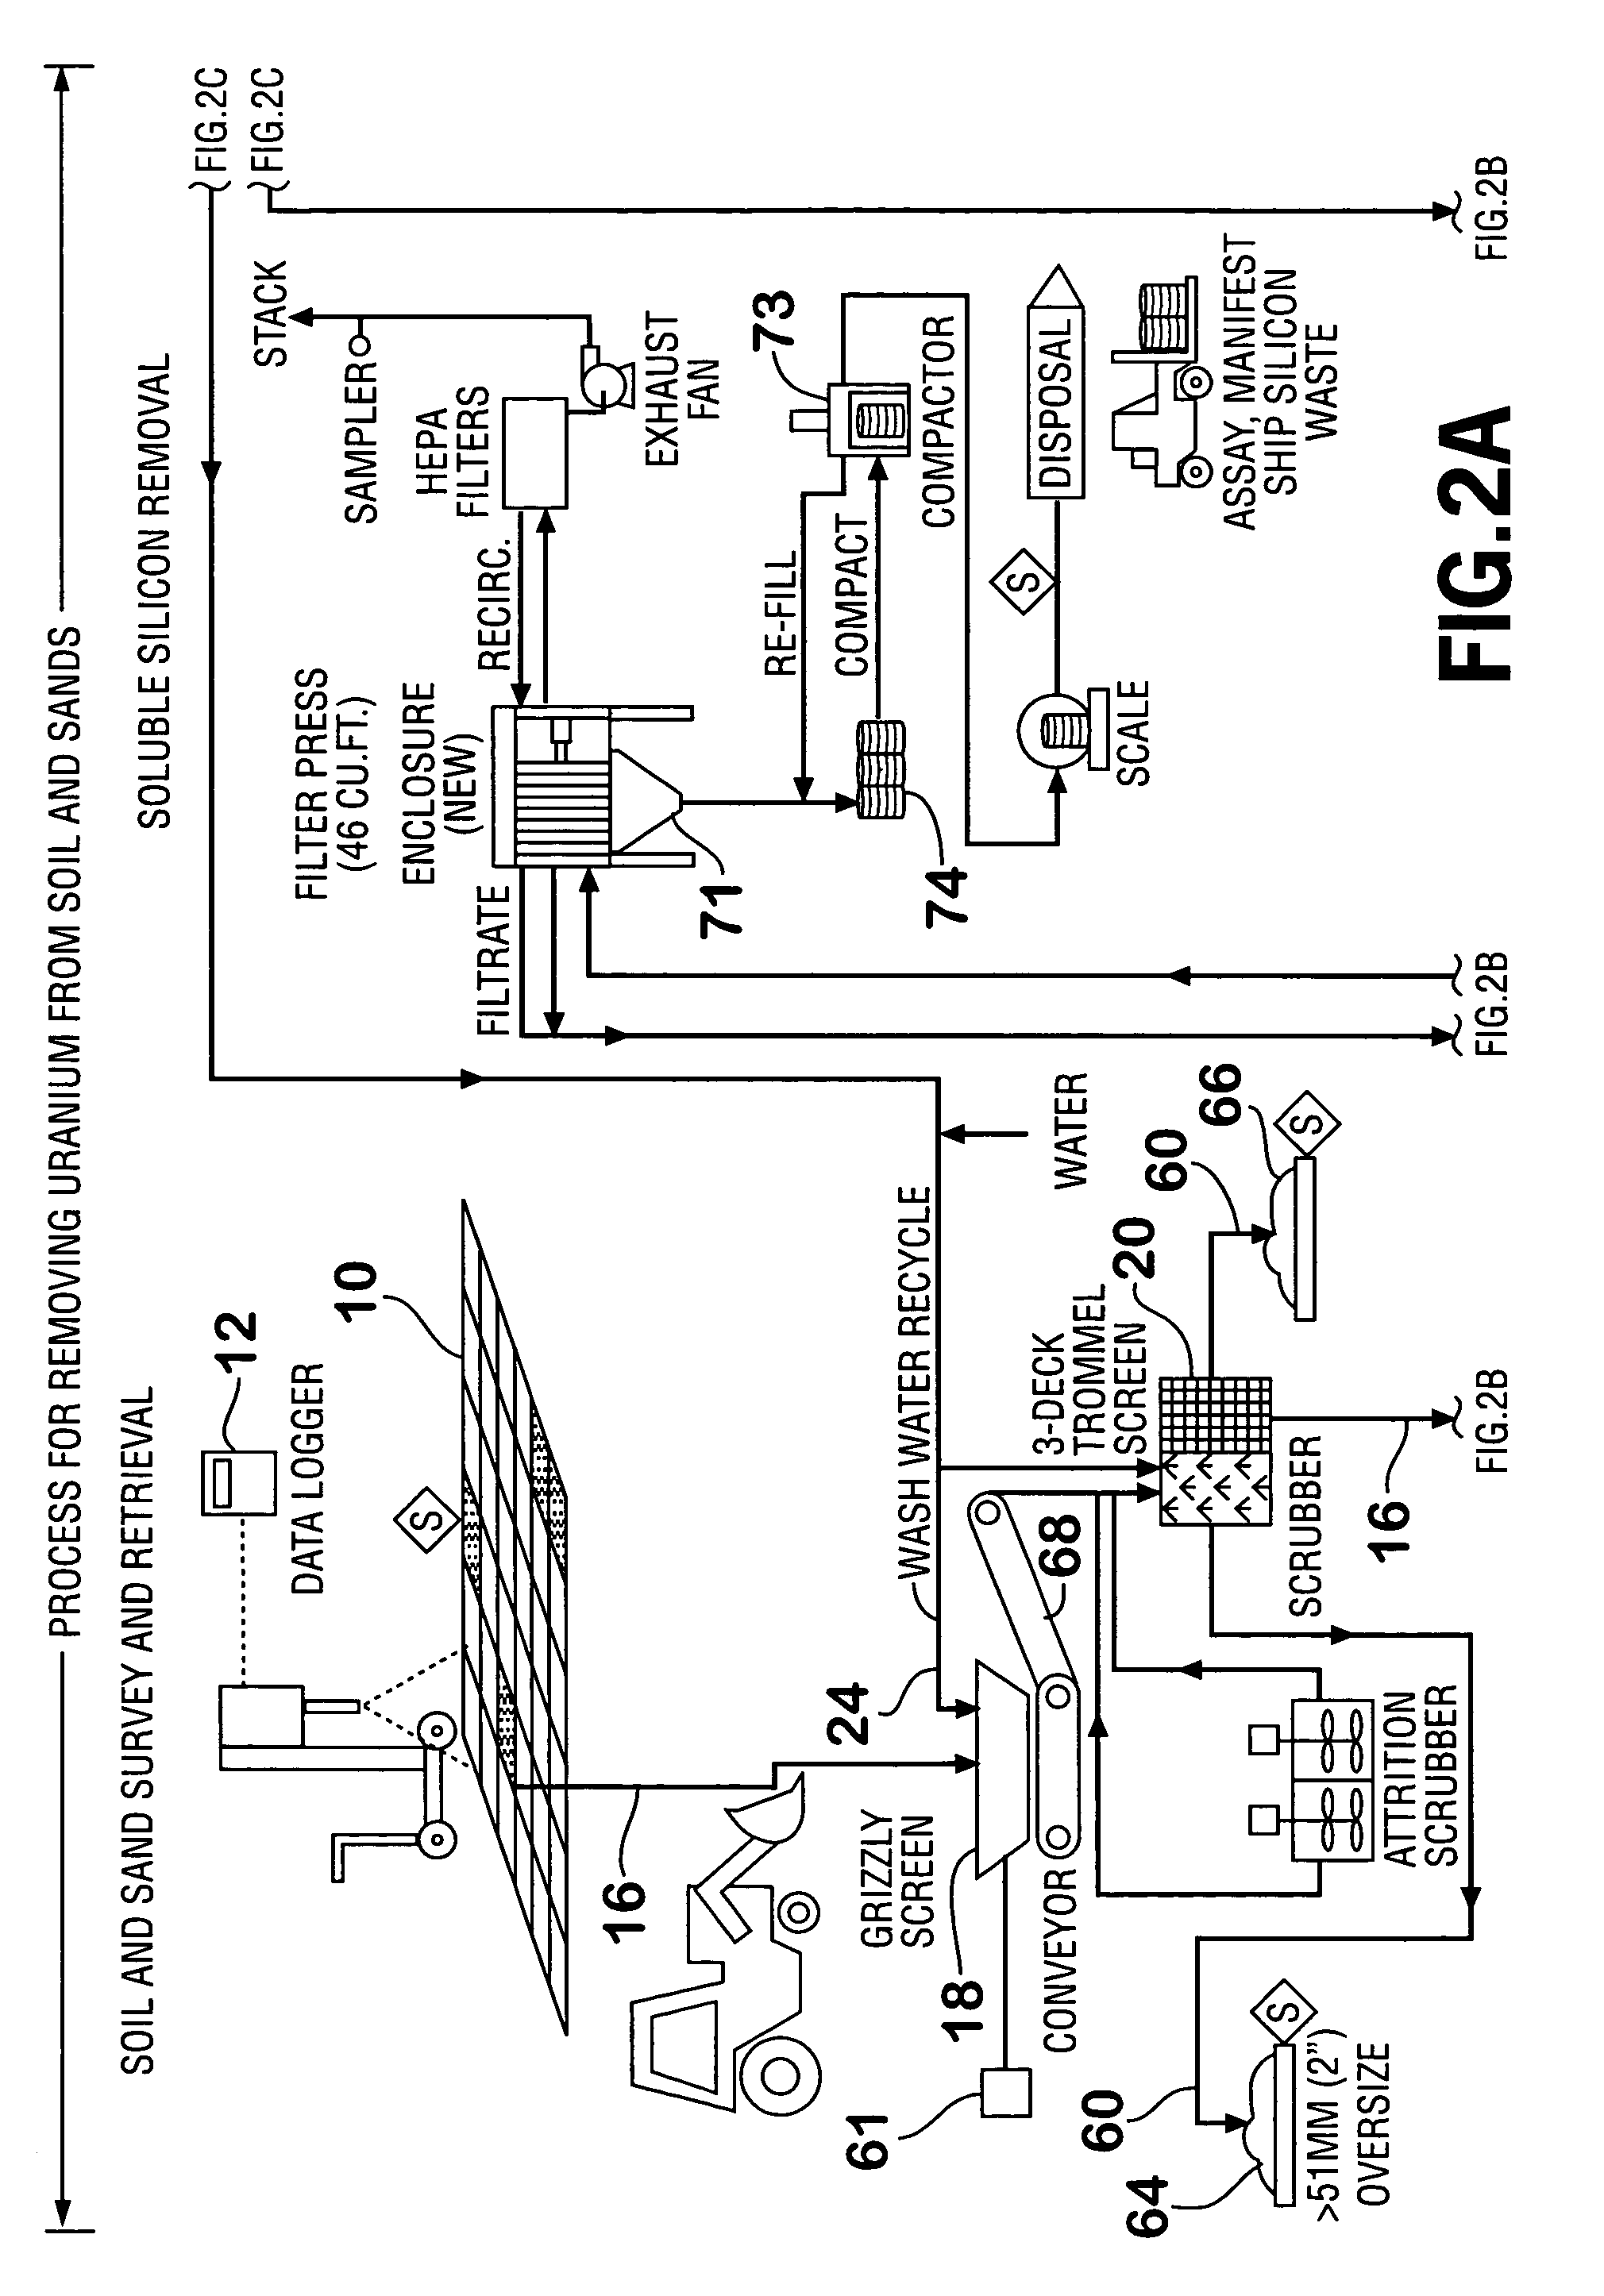 Apparatus and method for aiding in the removal of enriched uranium from soils